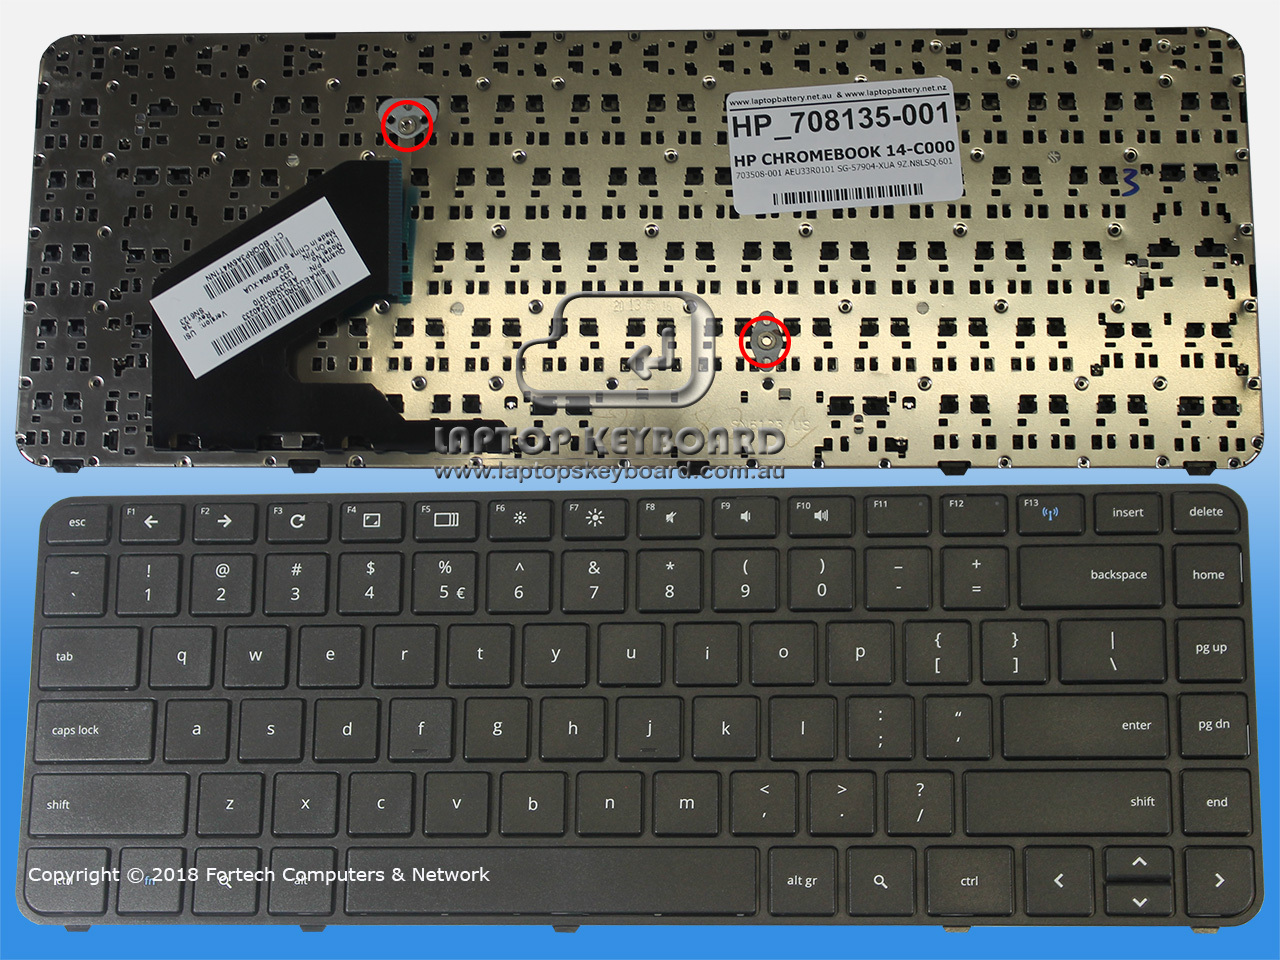 HP CHROMEBOOK 14-C000 REPLACE US KEYBOARD BLACK 708135-001 - Click Image to Close